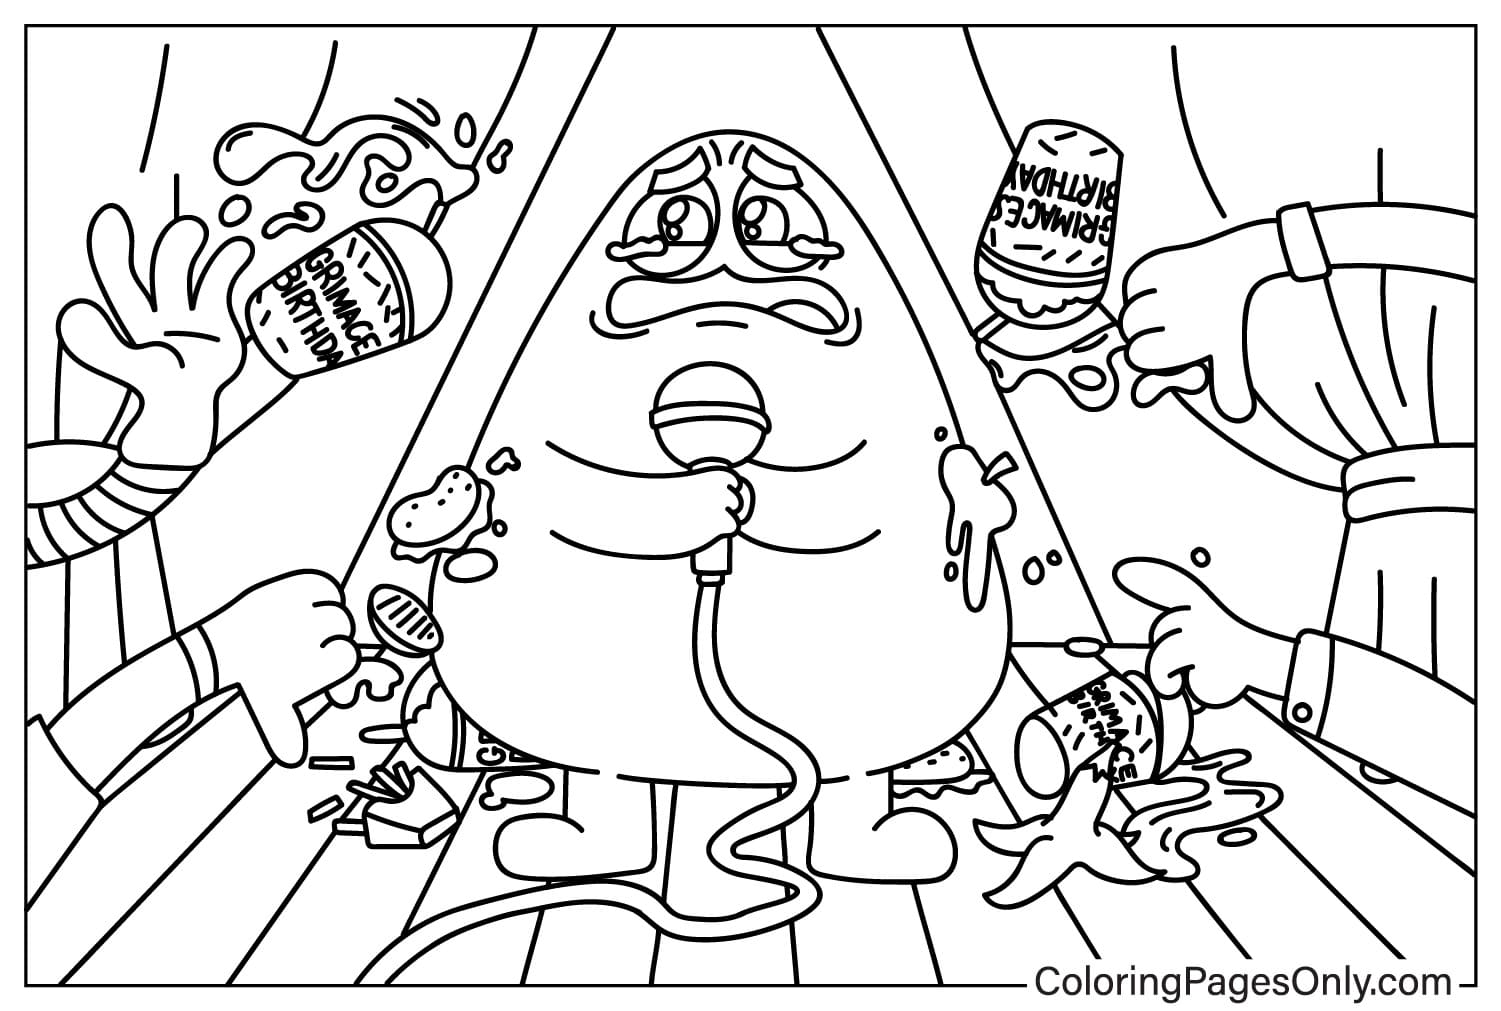 Grimace Sings Coloring Page from Grimace